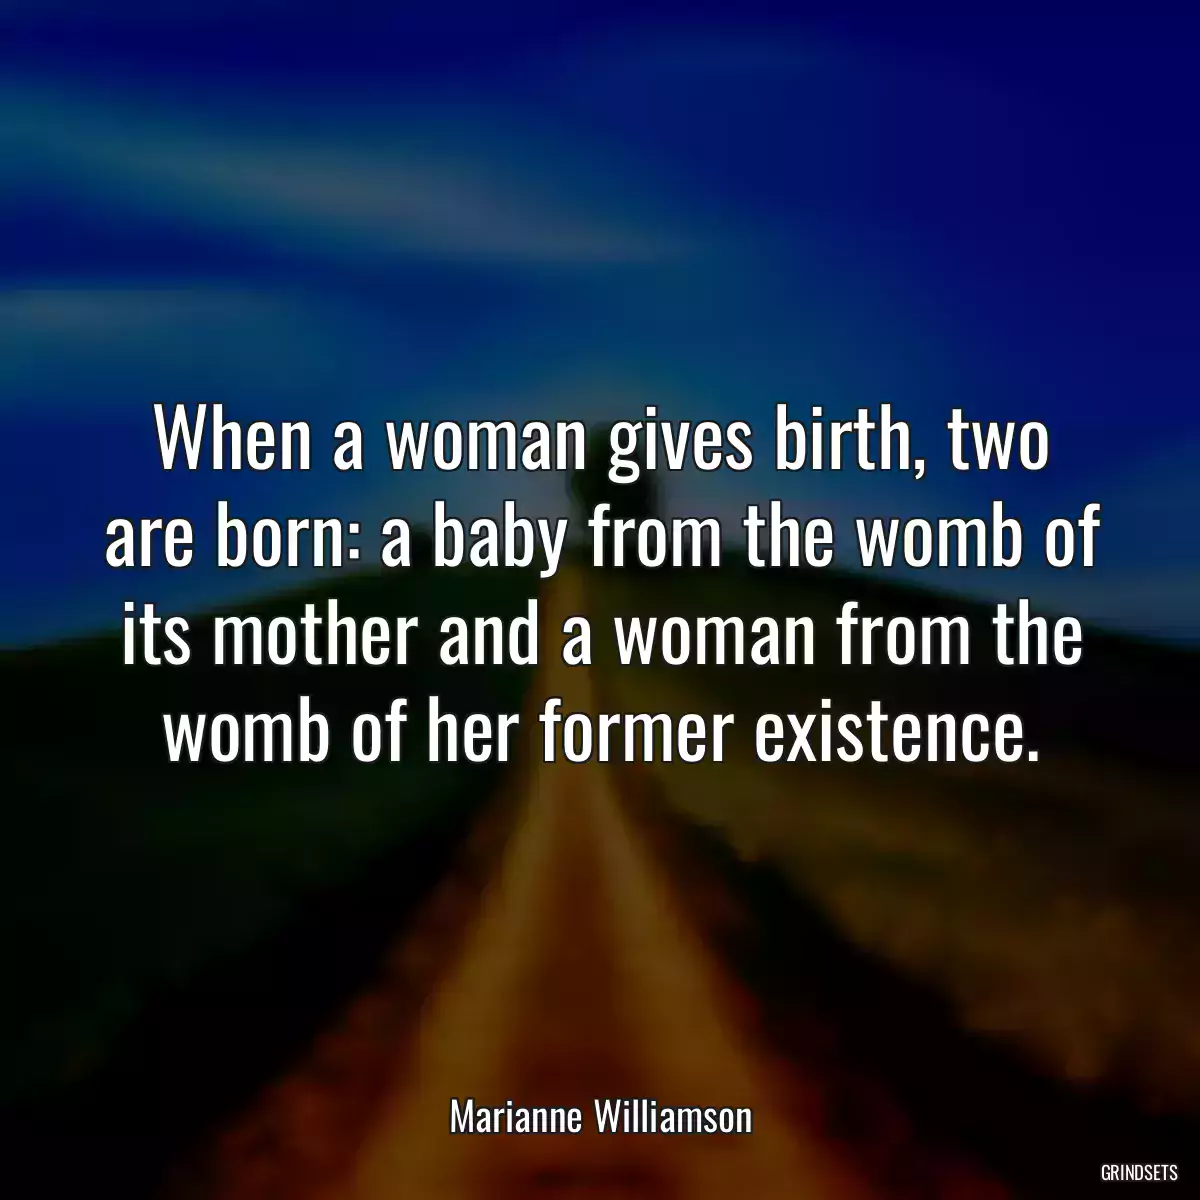 When a woman gives birth, two are born: a baby from the womb of its mother and a woman from the womb of her former existence.